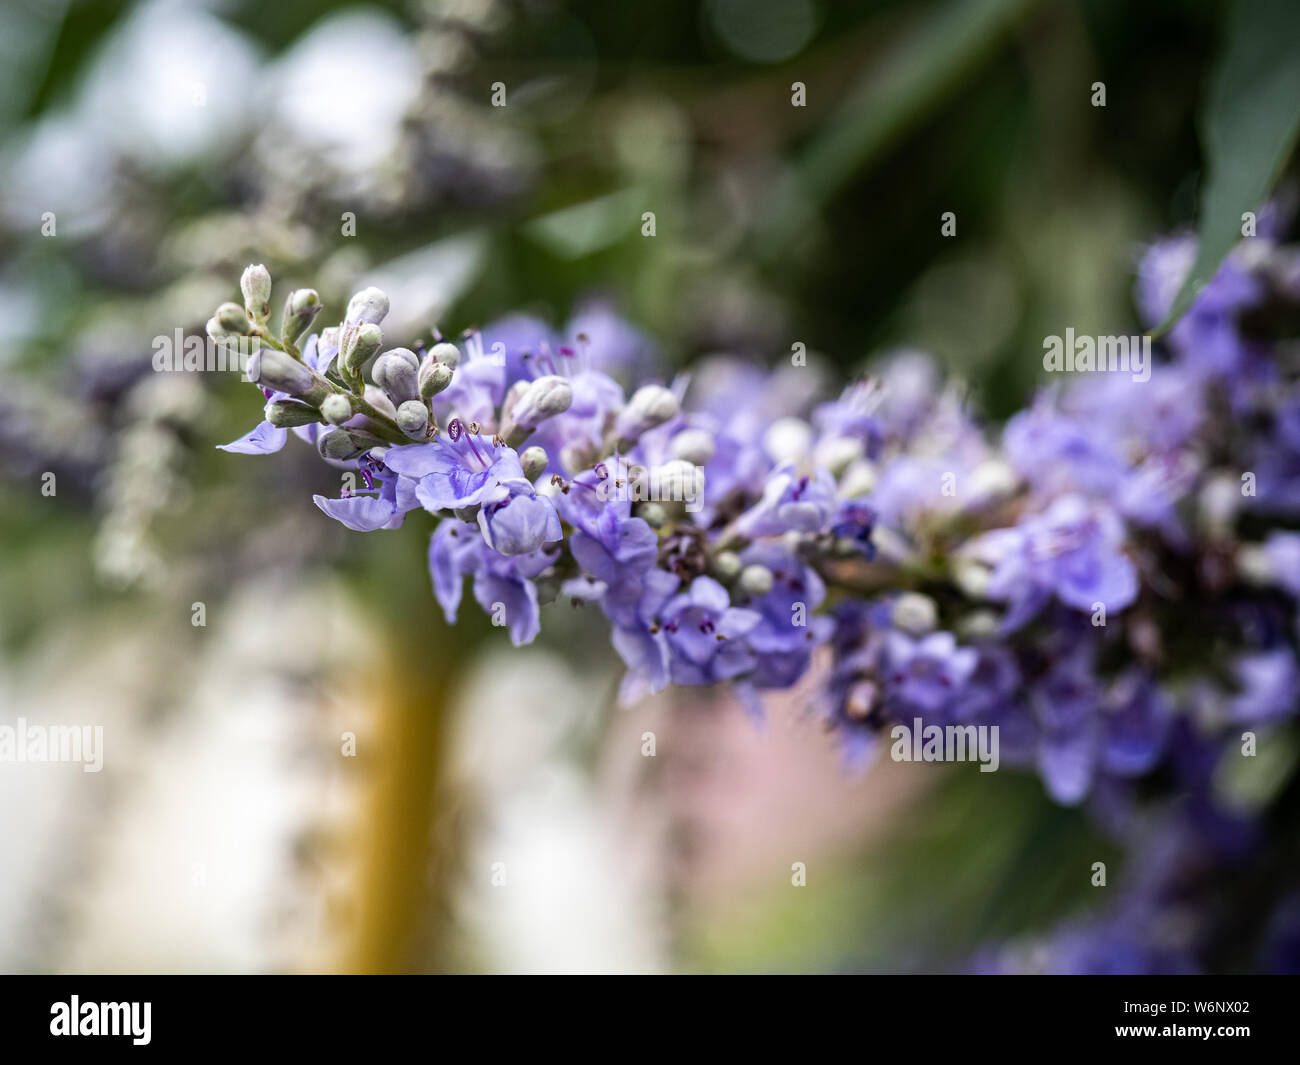 A string of lilac chaste tree flowers, vitex angus-castus, bloom beside a walking path in central Japan. Stock Photo